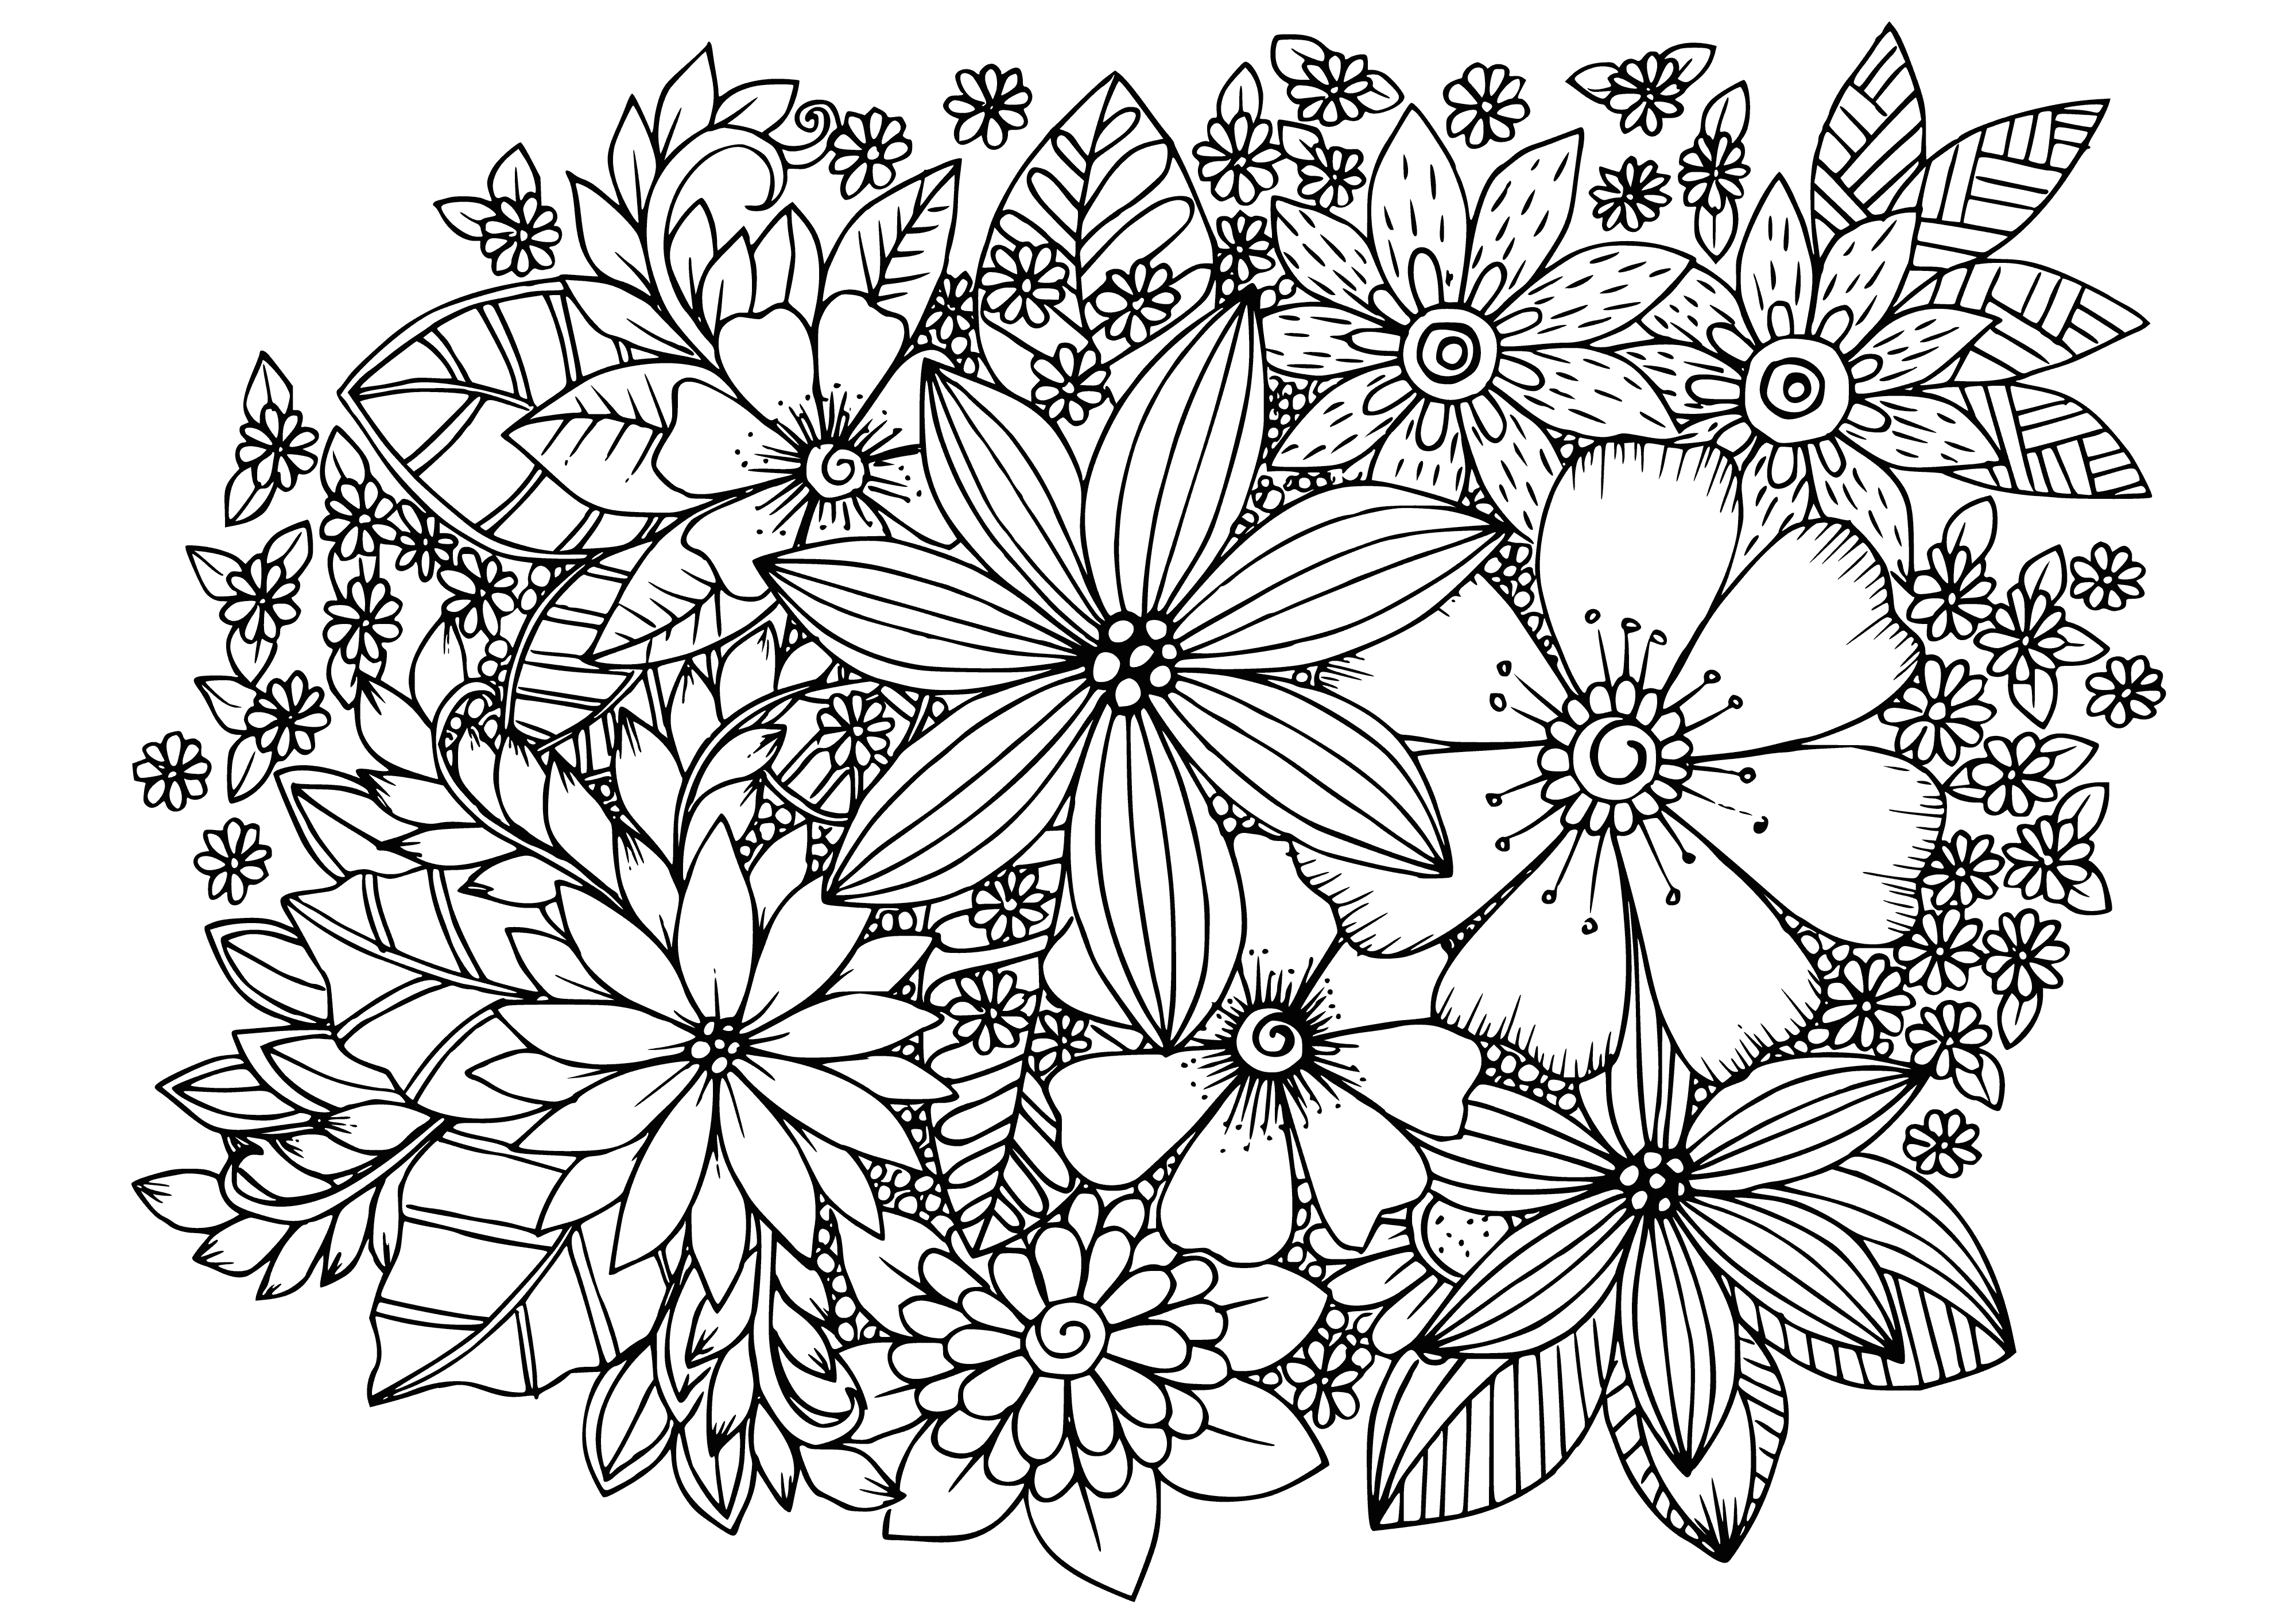 coloring page: Flowers in different colors and sizes with curled or straight petals and green leaves to color. #ColoringPage